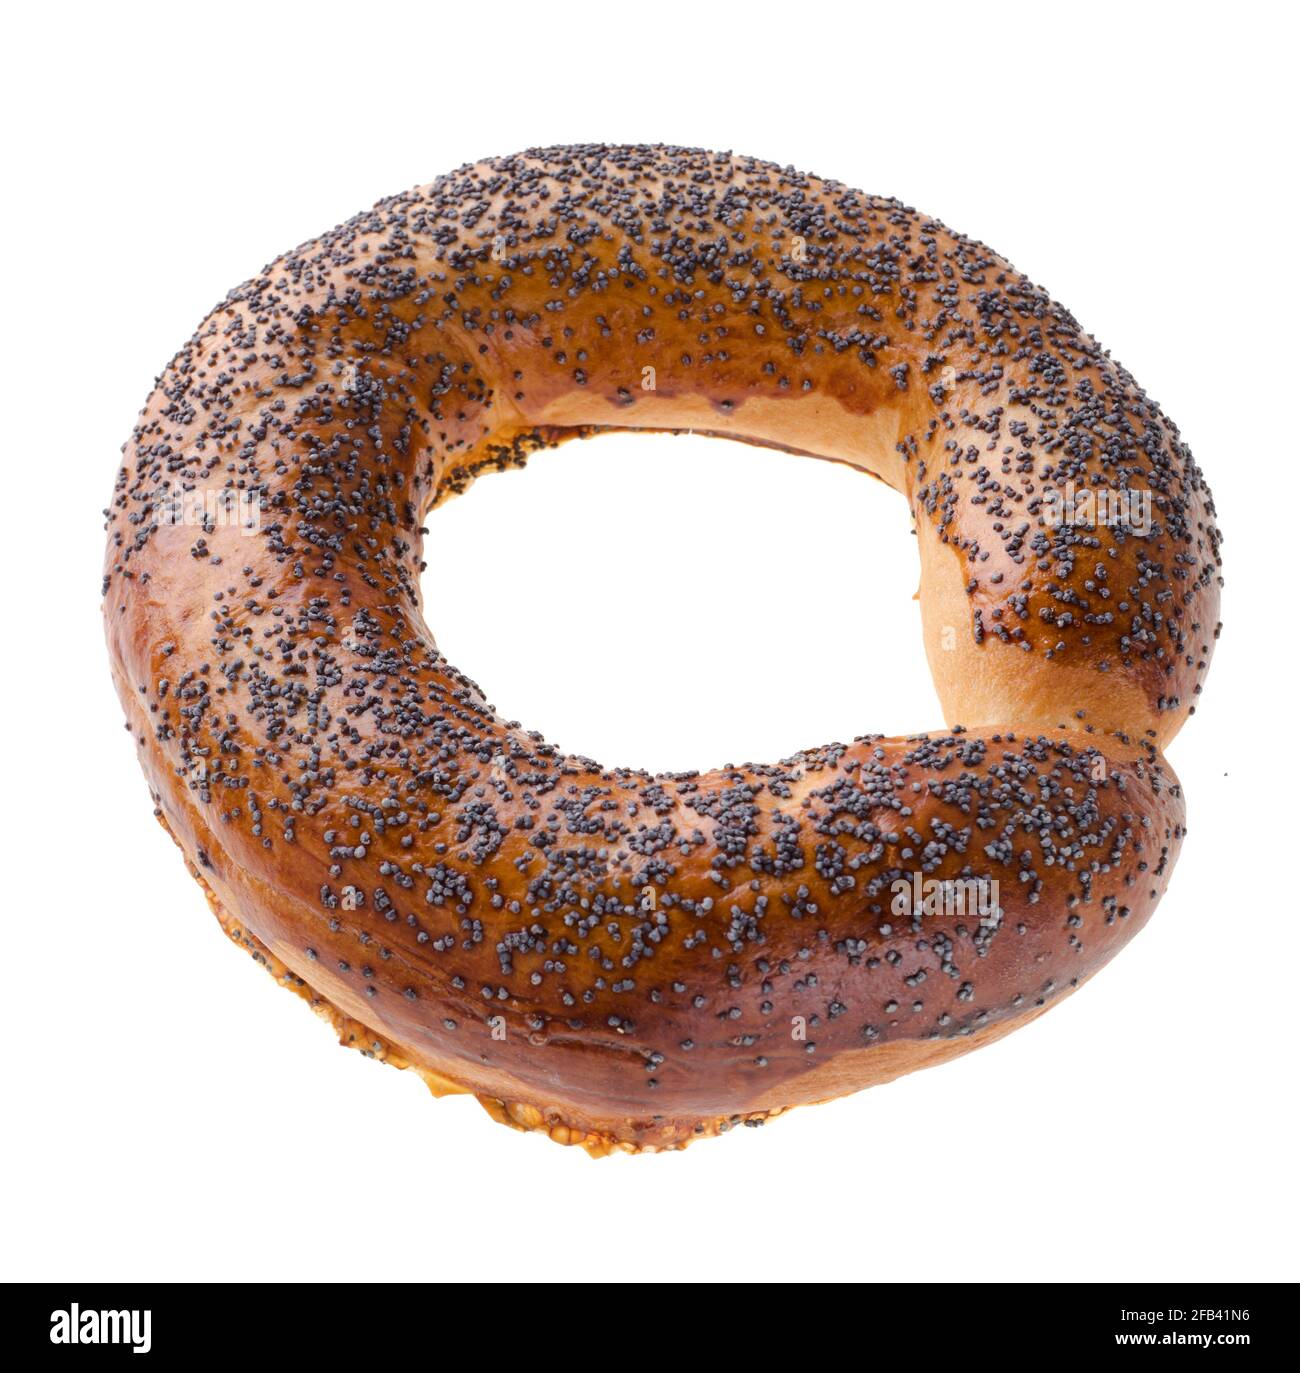 Ruddy bagel with top sprinkled with poppy seeds, on a white background in isolation Stock Photo